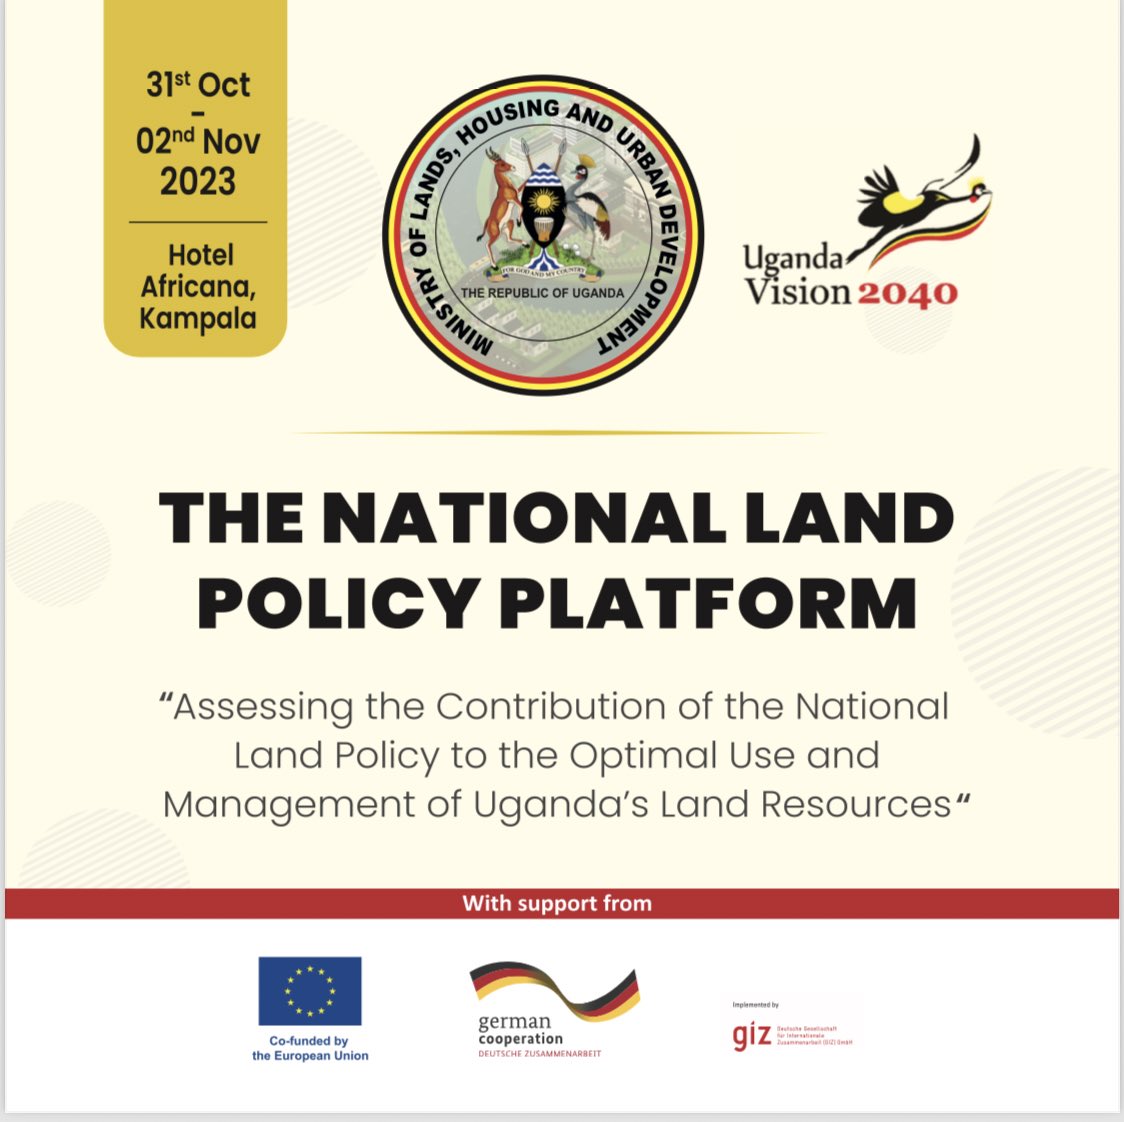 The question of Balaalo, customary land tenure, Mailo land owners and tenants and Women Land Rights are one of the key issues that have discussed at the ongoing three day National Land Policy Platform.

#NLPP2023 
#Nationallandplatform2023 
#S4HL